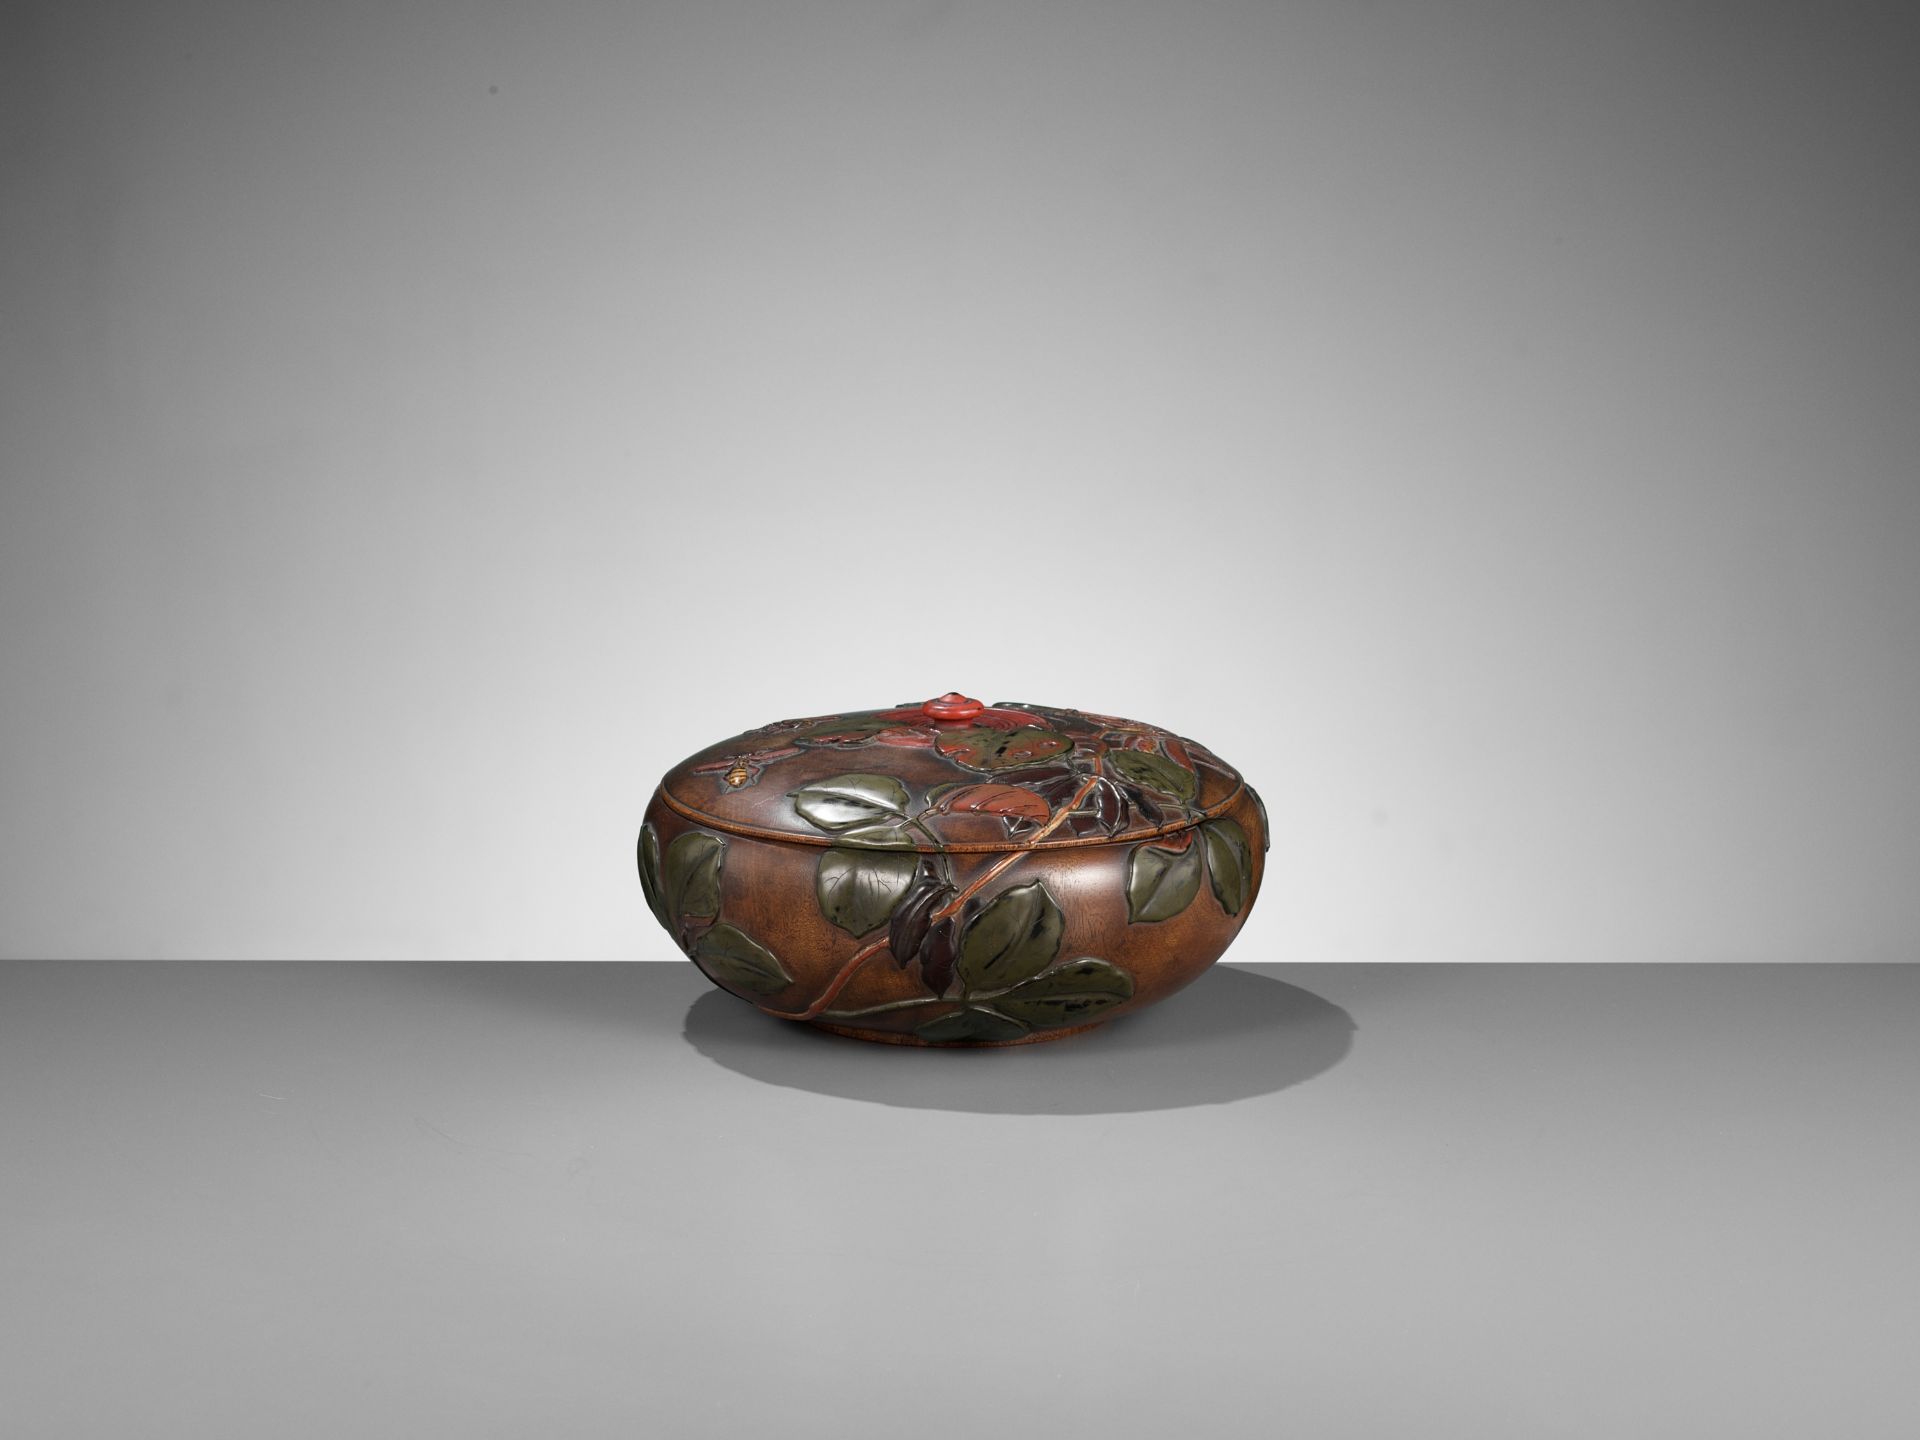 IKKOKUSAI: A SUPERB TAKAMORIE LACQUERED CIRCULAR WOOD BOX AND COVER WITH INSECTS AND LEAVES - Image 3 of 12